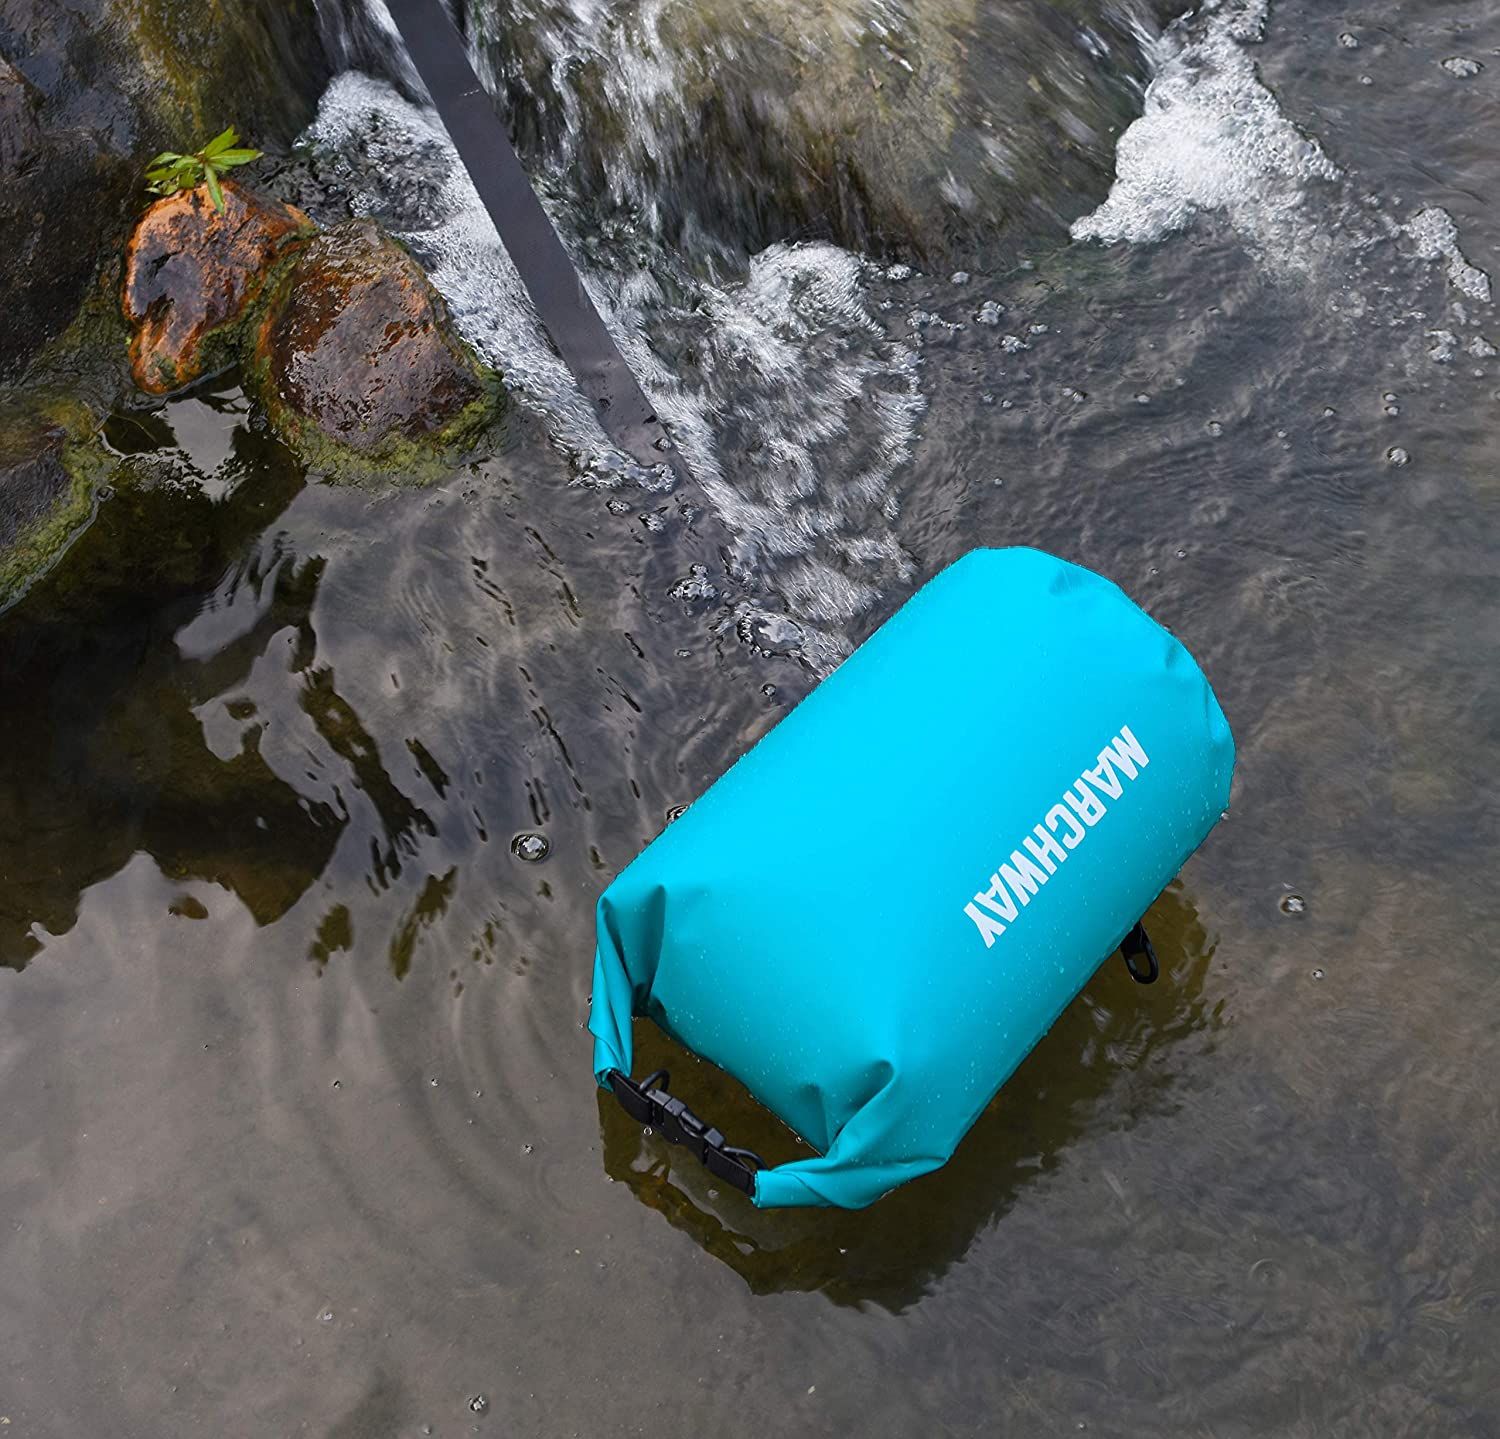 A teal dry bag closed and floating on a stream